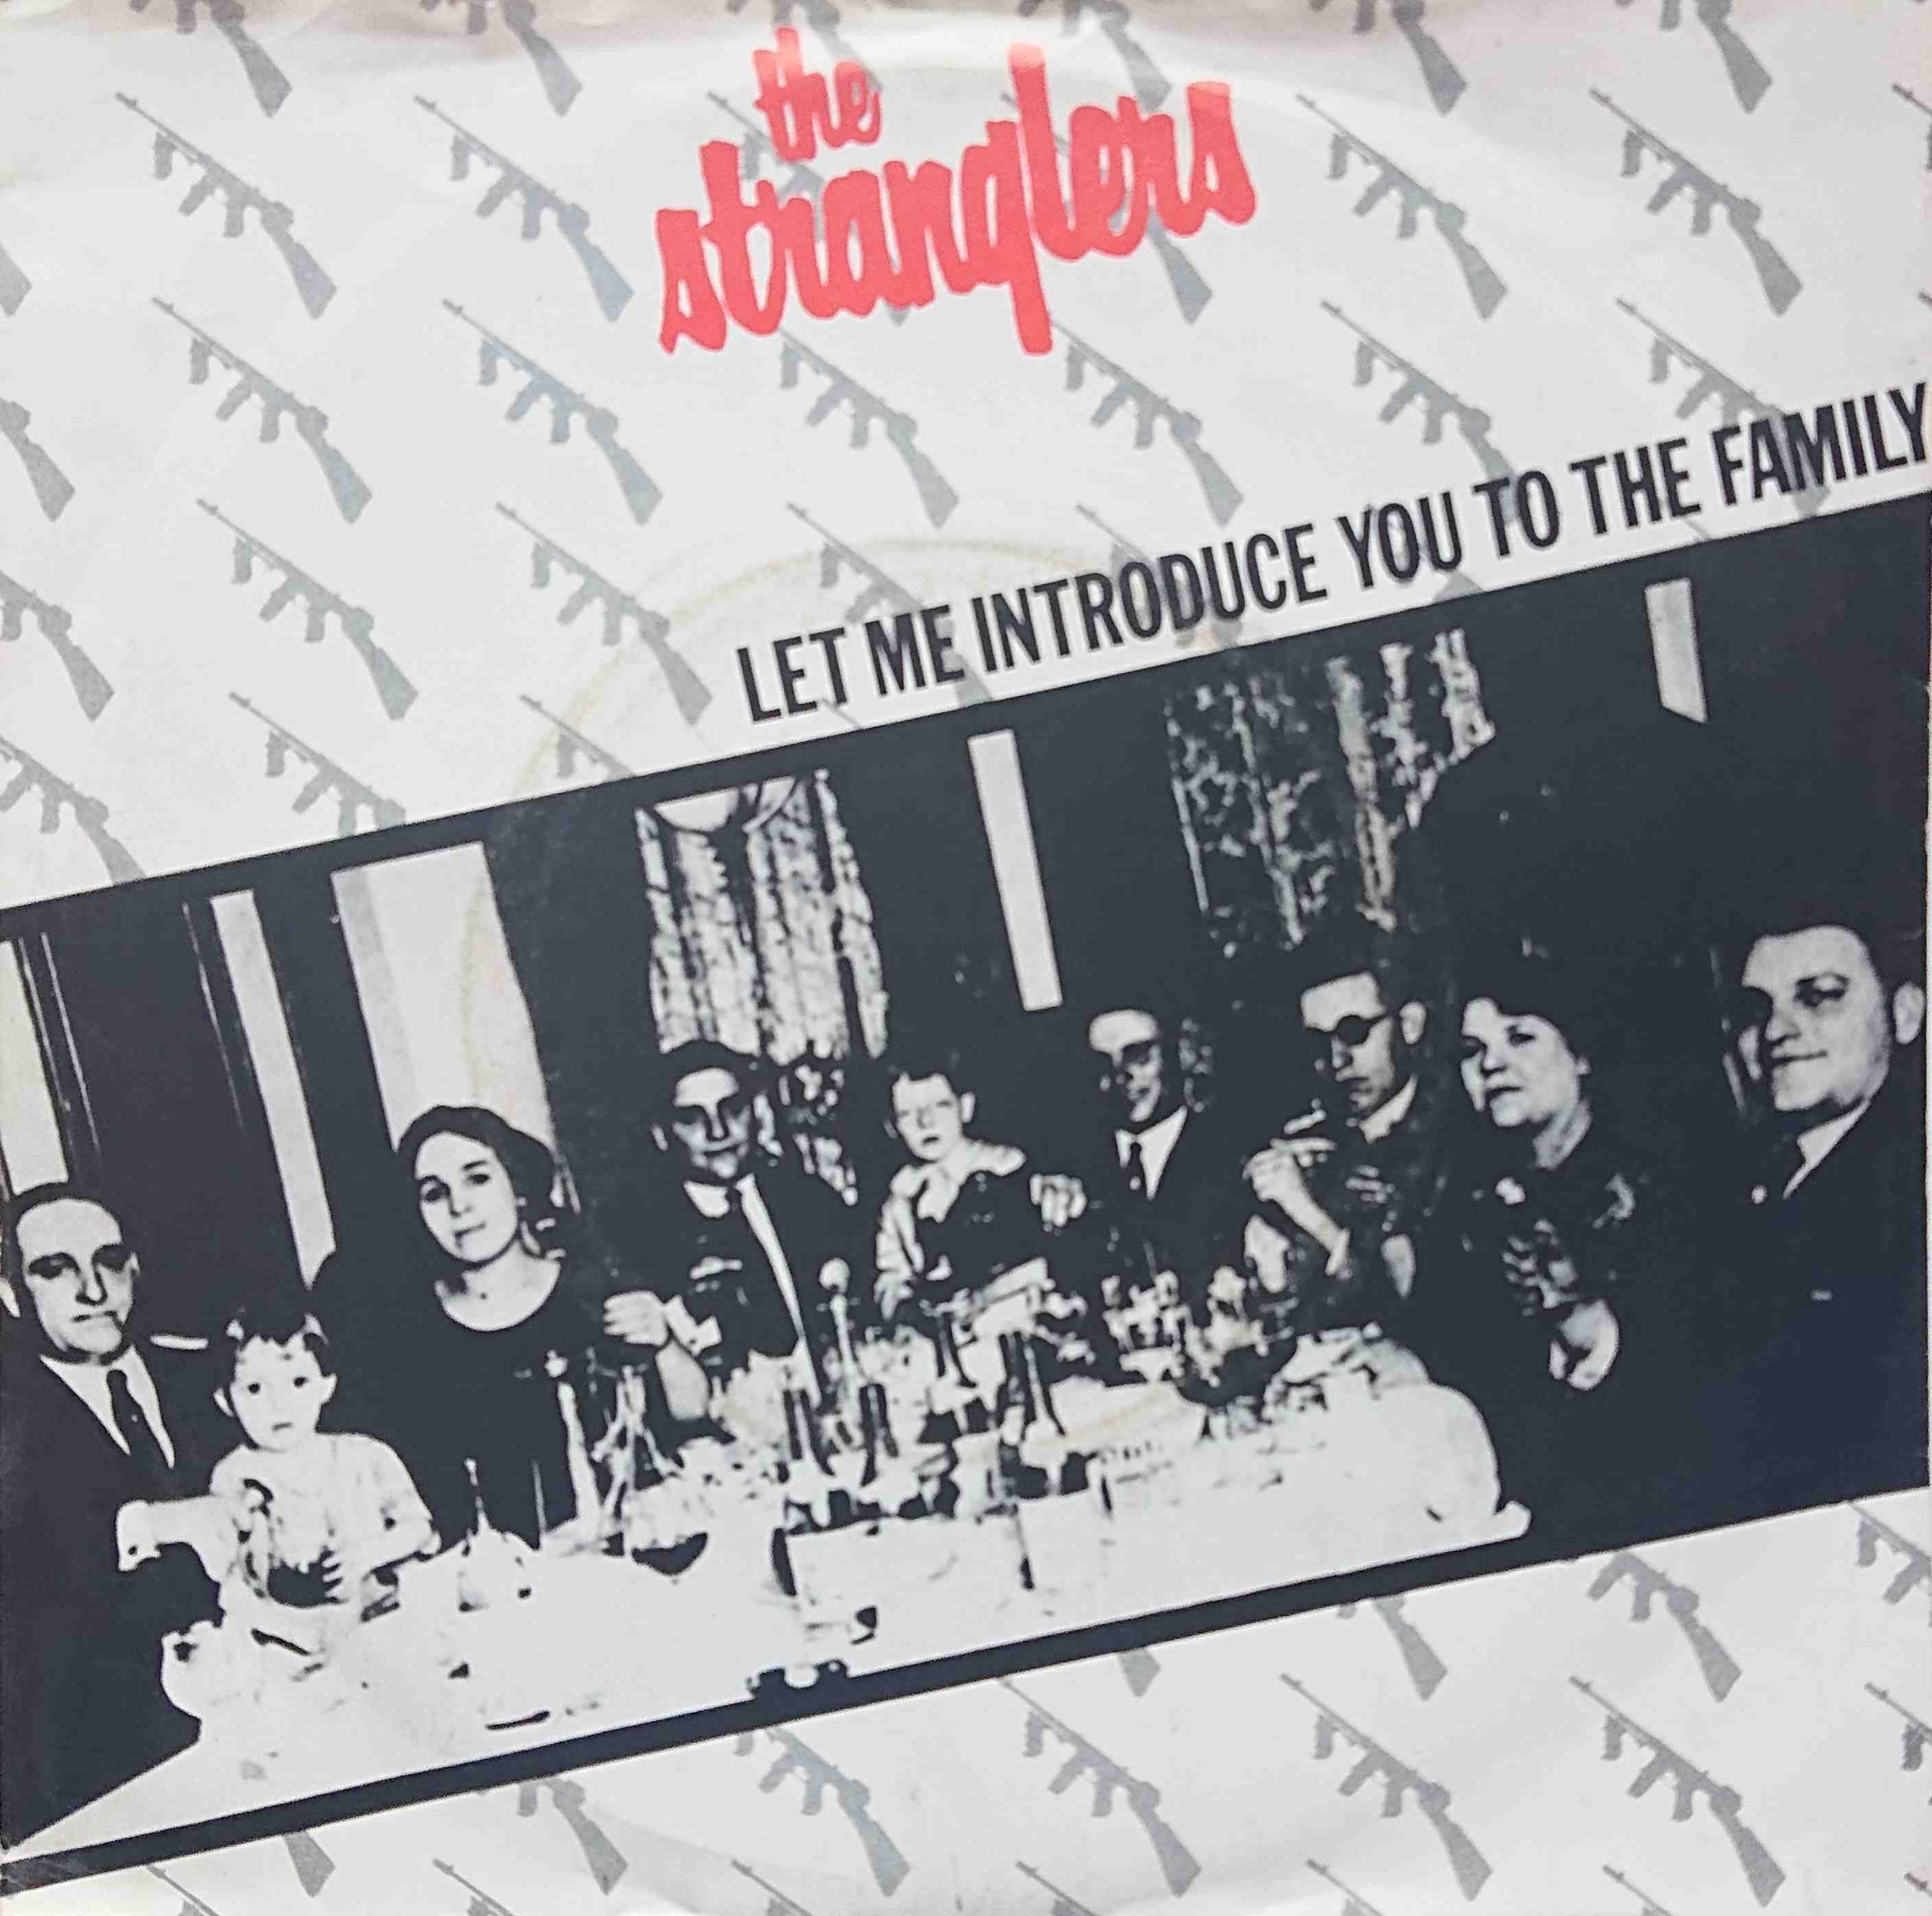 Picture of Let me introduce you to the family by artist The Stranglers from The Stranglers singles